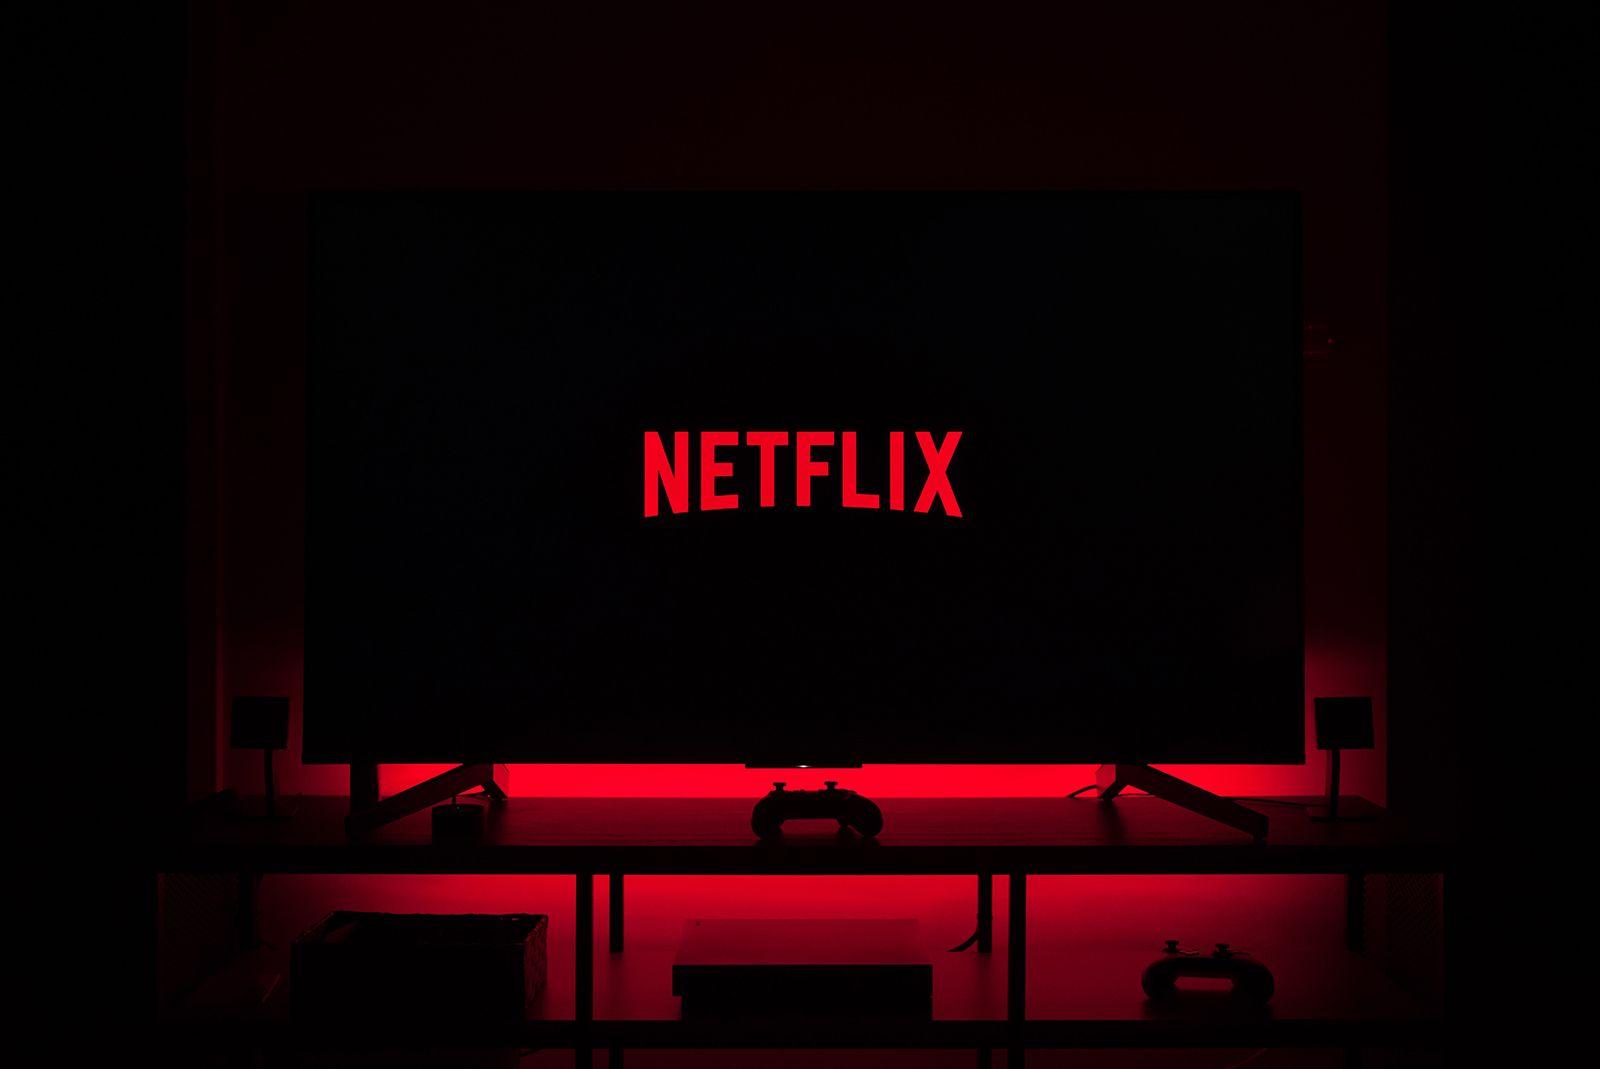 Here's how to get Netflix for free and save as much as $240 per year